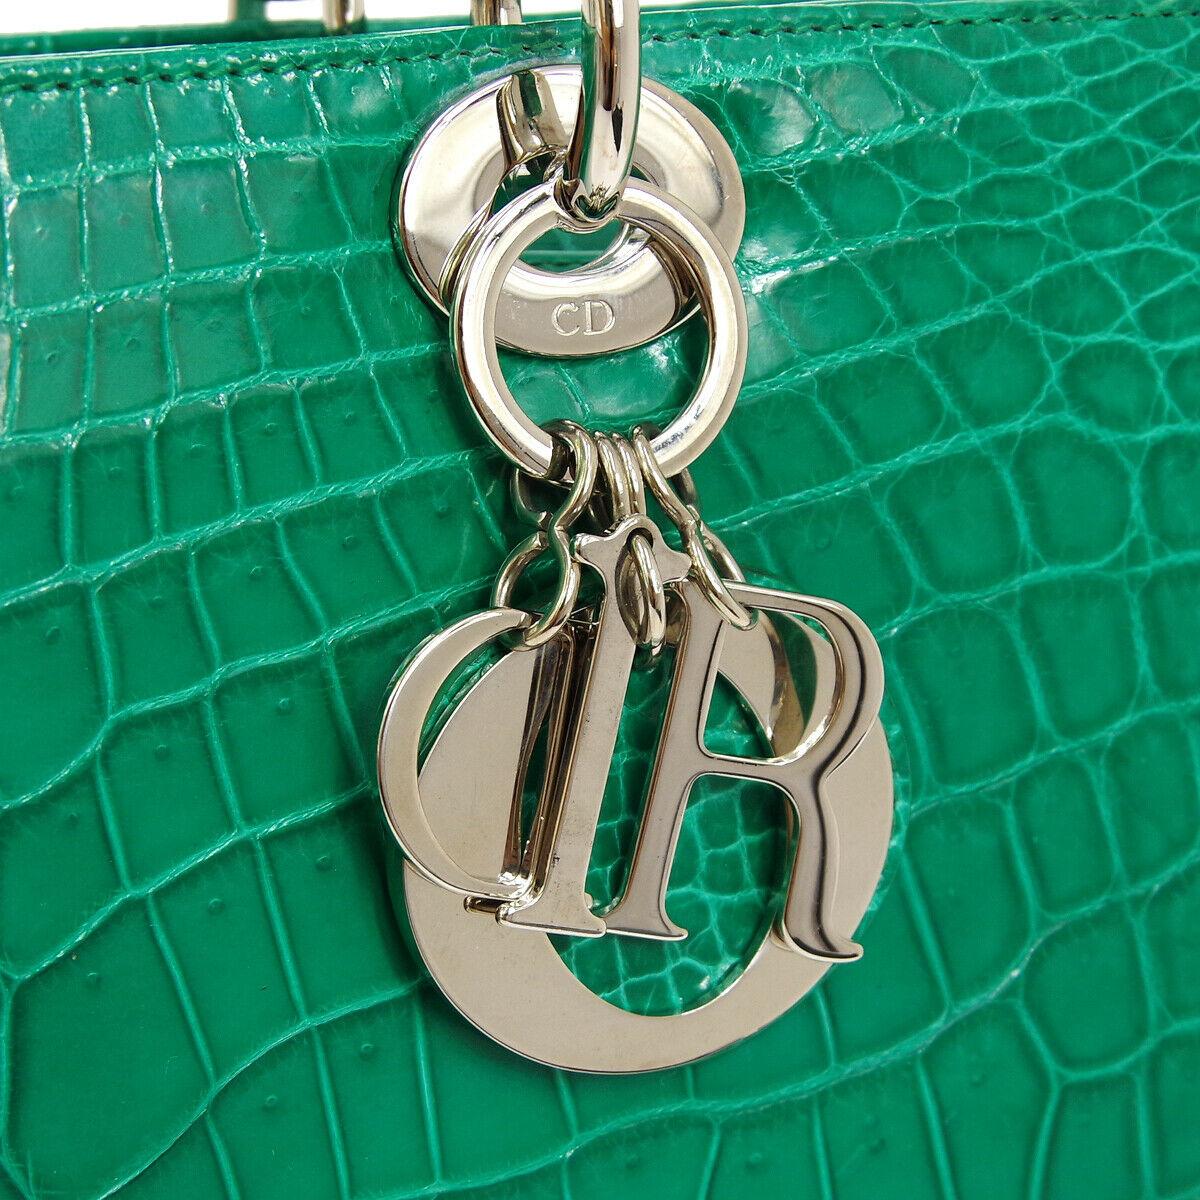 Christian Dior Green Crocodile Exotic Silver Charm Top Handle Satchel Tote Shoulder Bag

Crocodile leather
Silver tone hardware
Leather lining
Date code present
Made in Italy
Handle drop 4